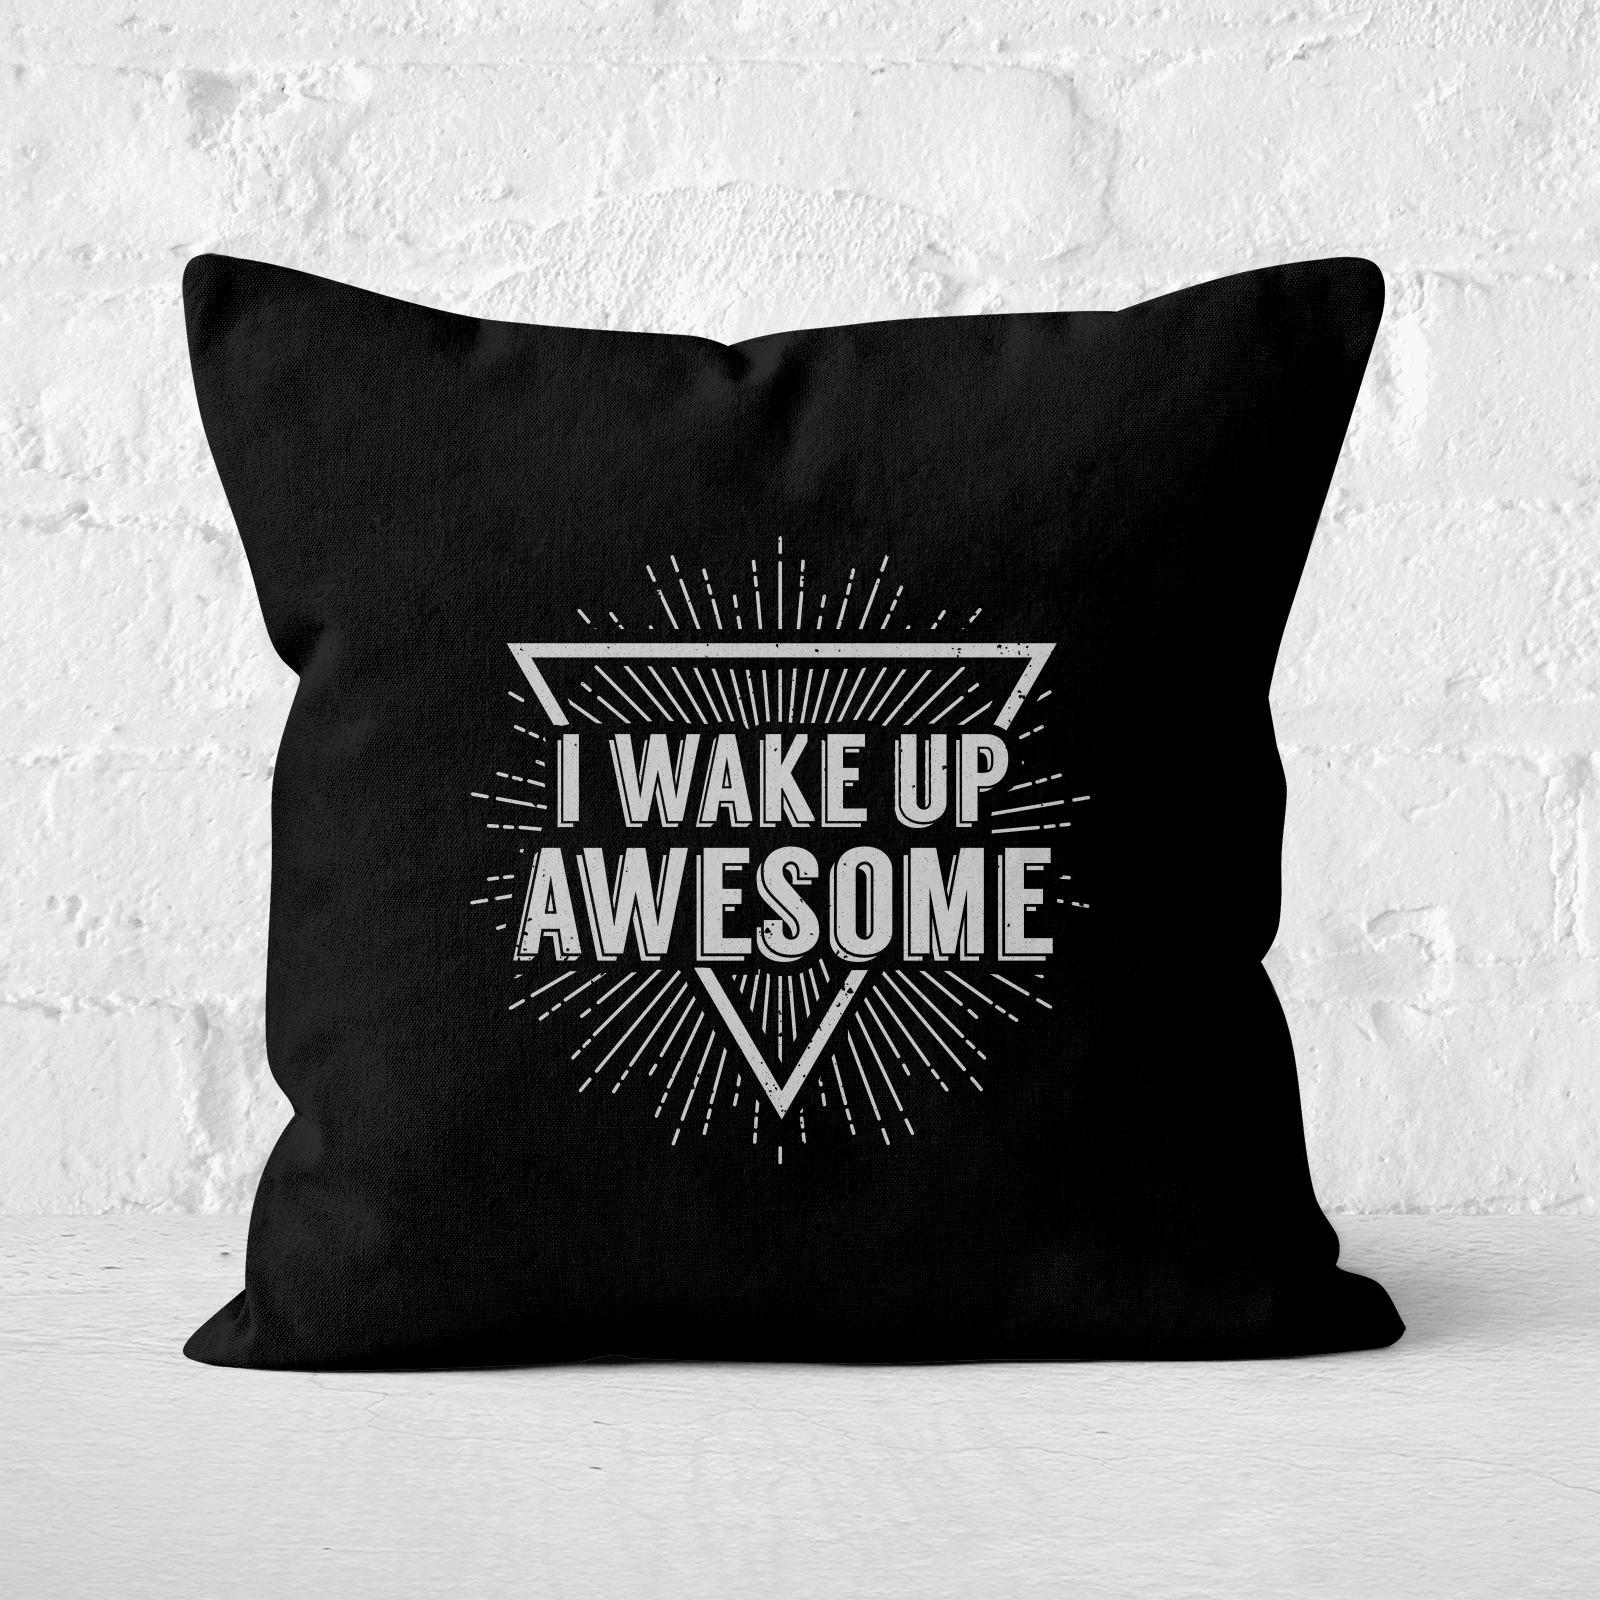 I Wake Up Awesome Square Cushion - 60x60cm - Soft Touch